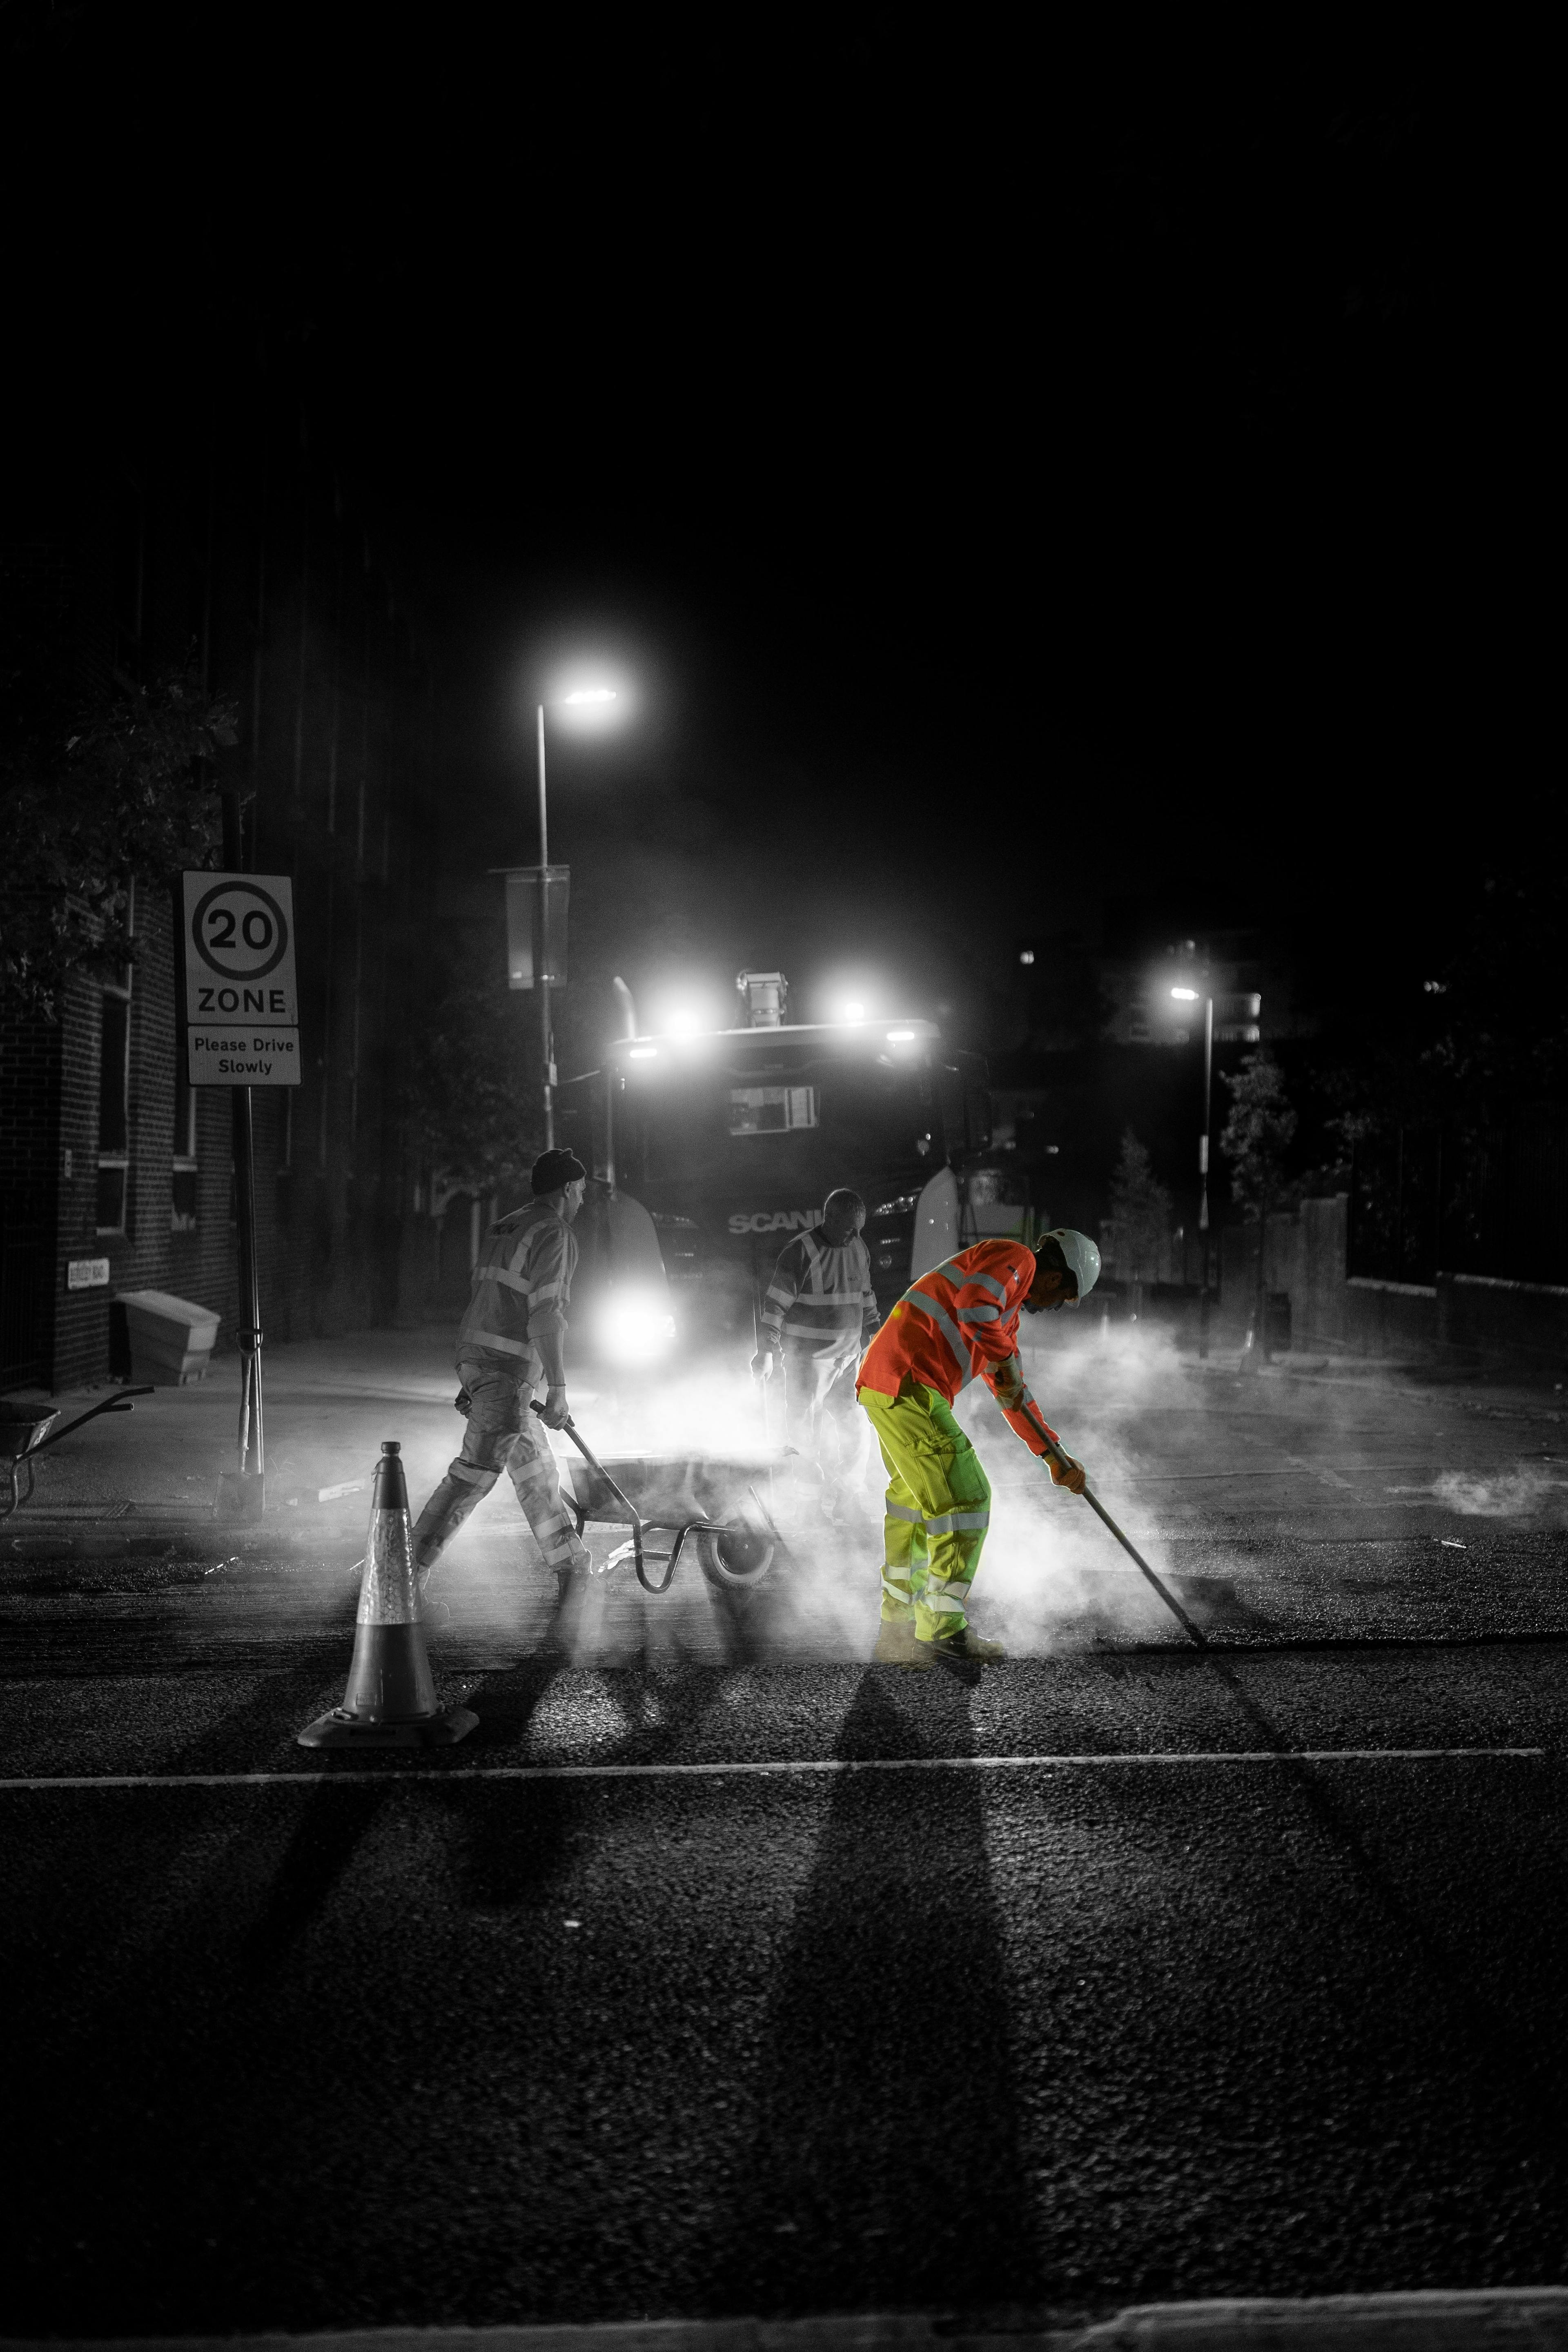 Three highway repair workers working at night on UK road fixing a hole